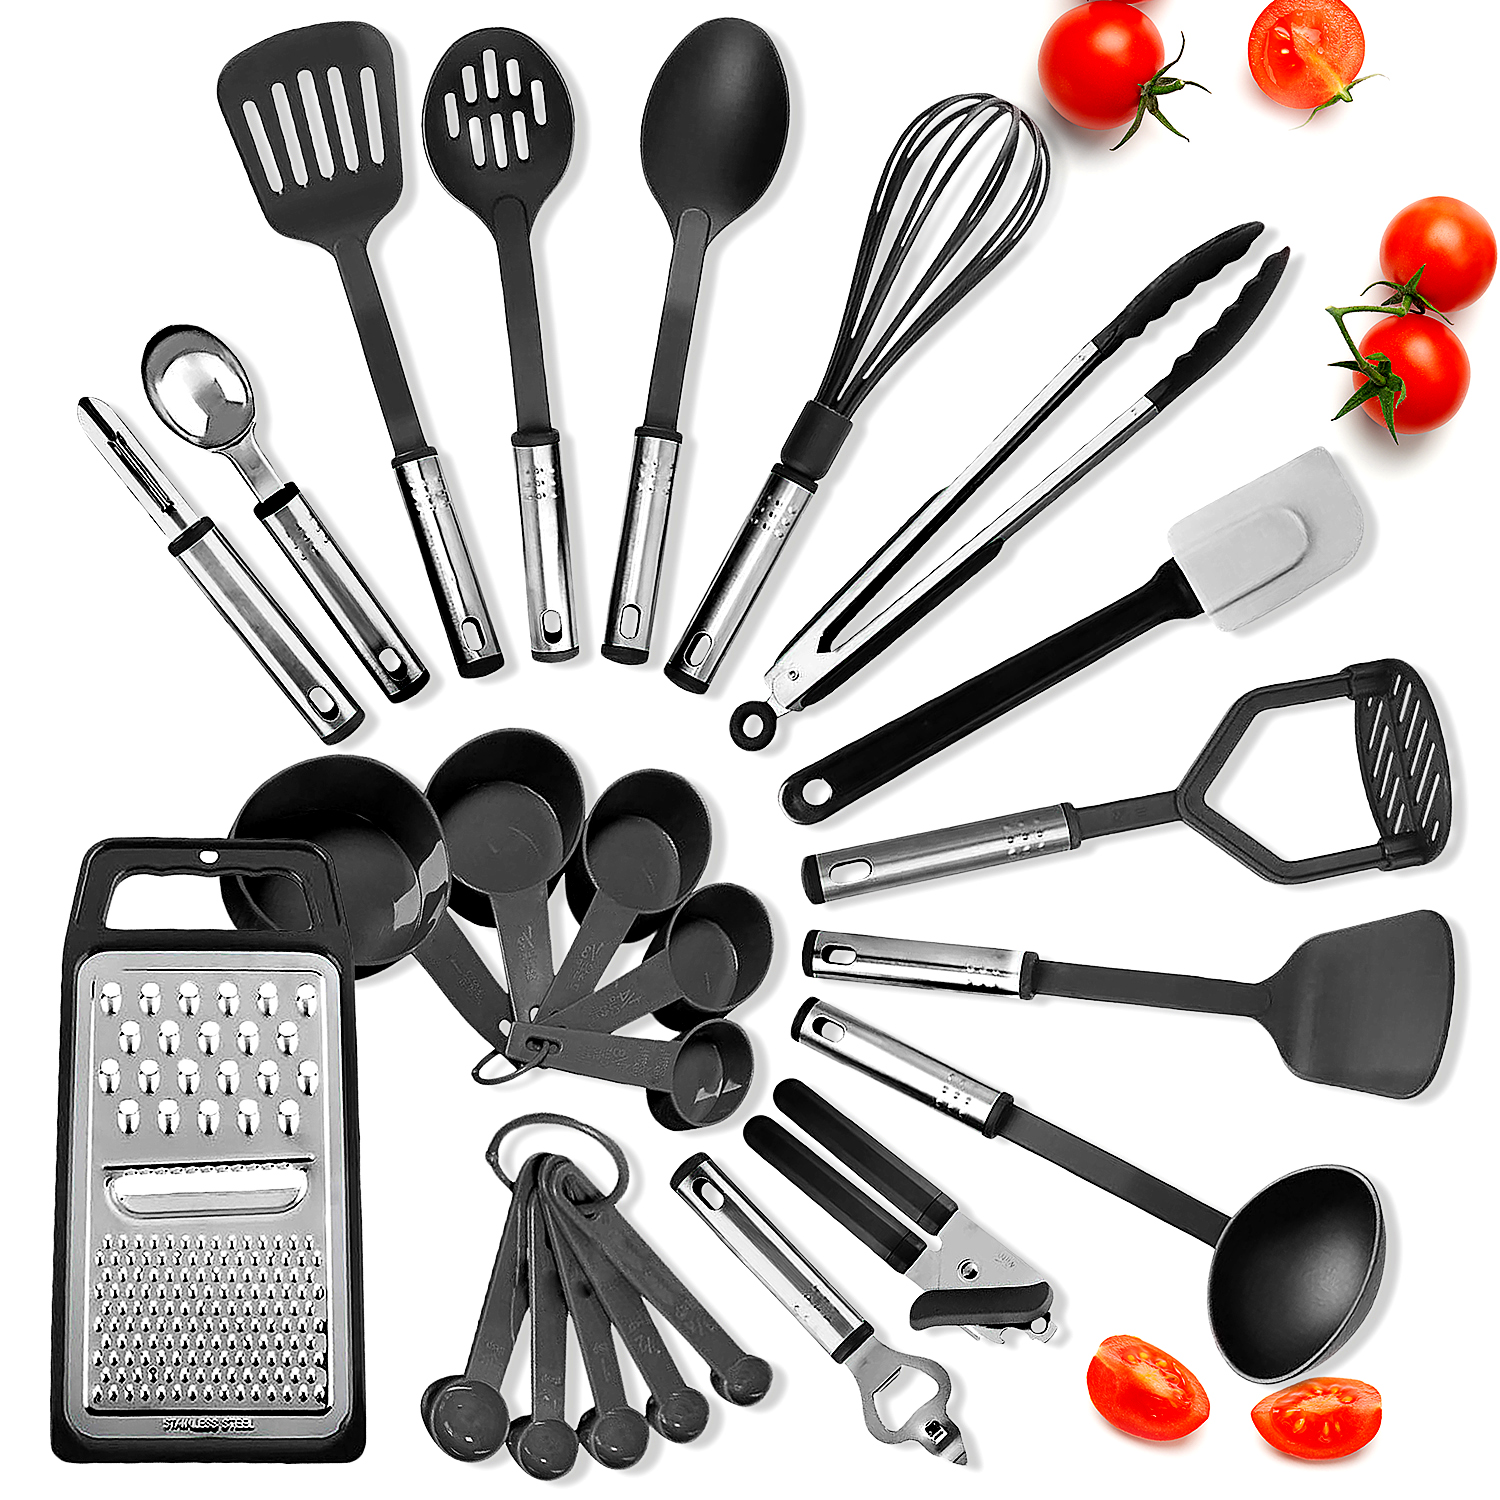 Bargain-priced cooking tools and utensils